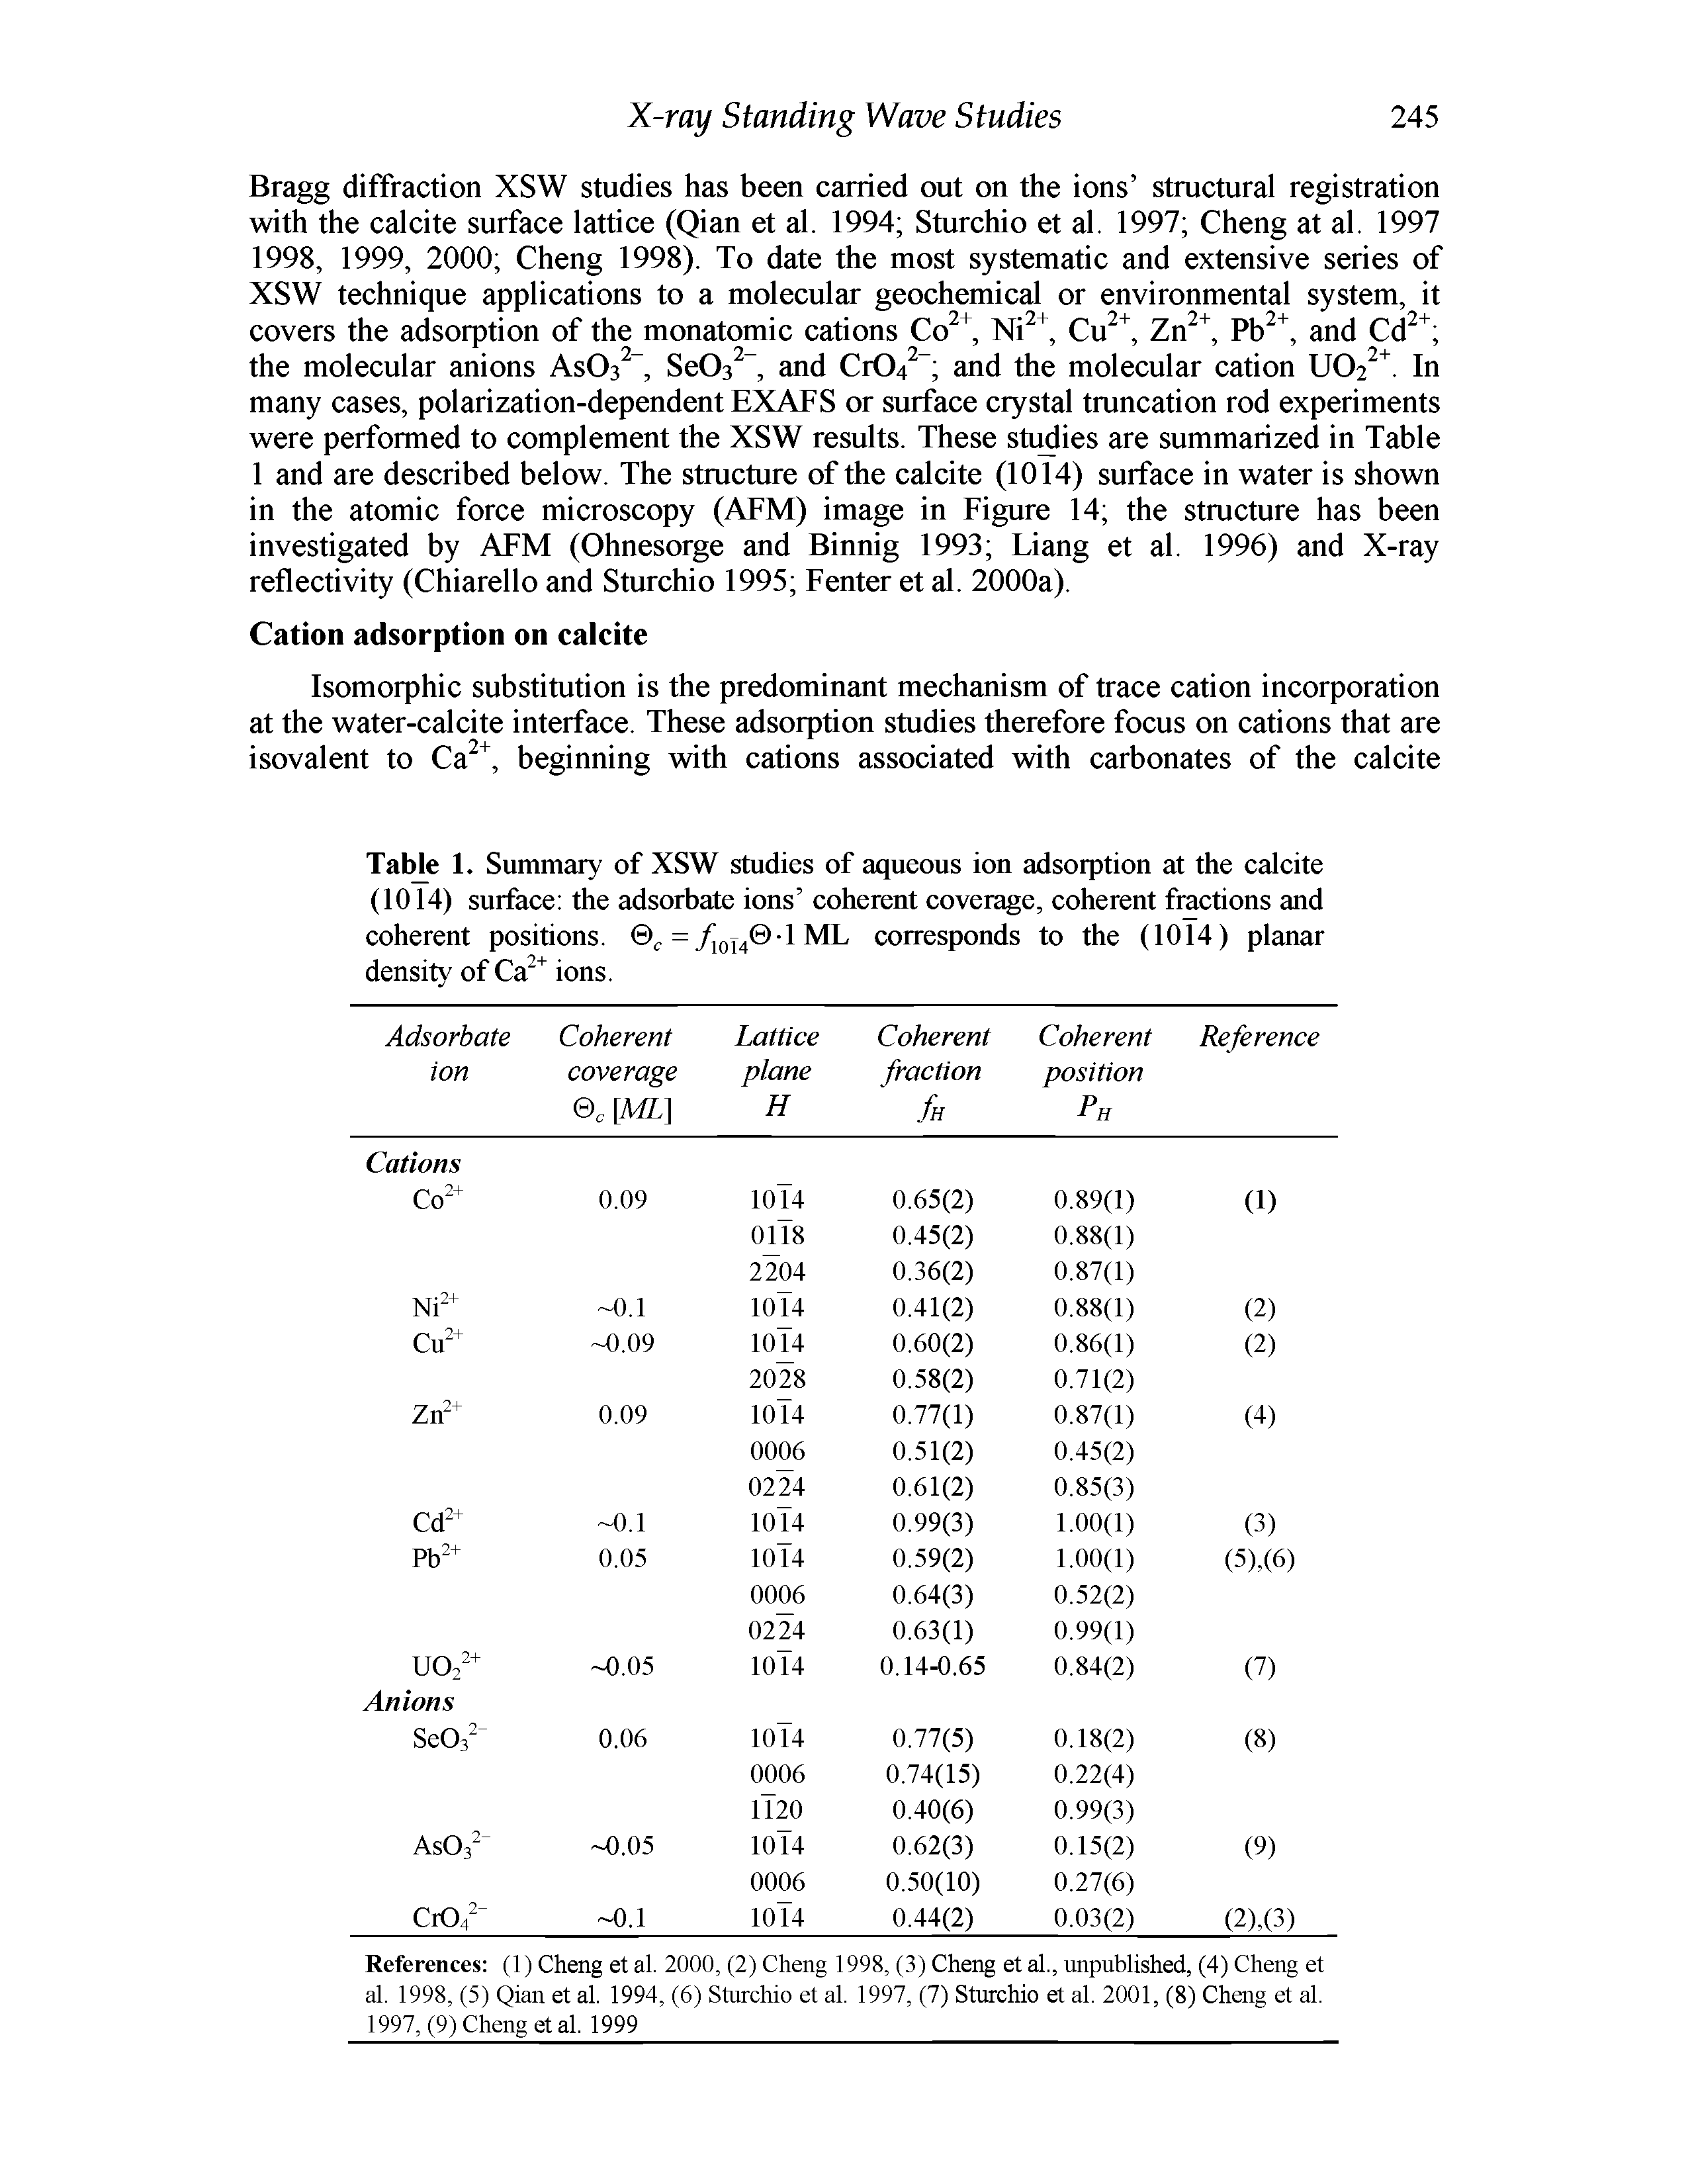 Table 1. Summary of XSW studies of aqueous ion adsorption at the calcite (1014) surface the adsorbate ions coherent coverage, coherent fractions and coherent positions. c =yjoT40-lML corresponds to the (1014) planar density of Ca2+ ions.